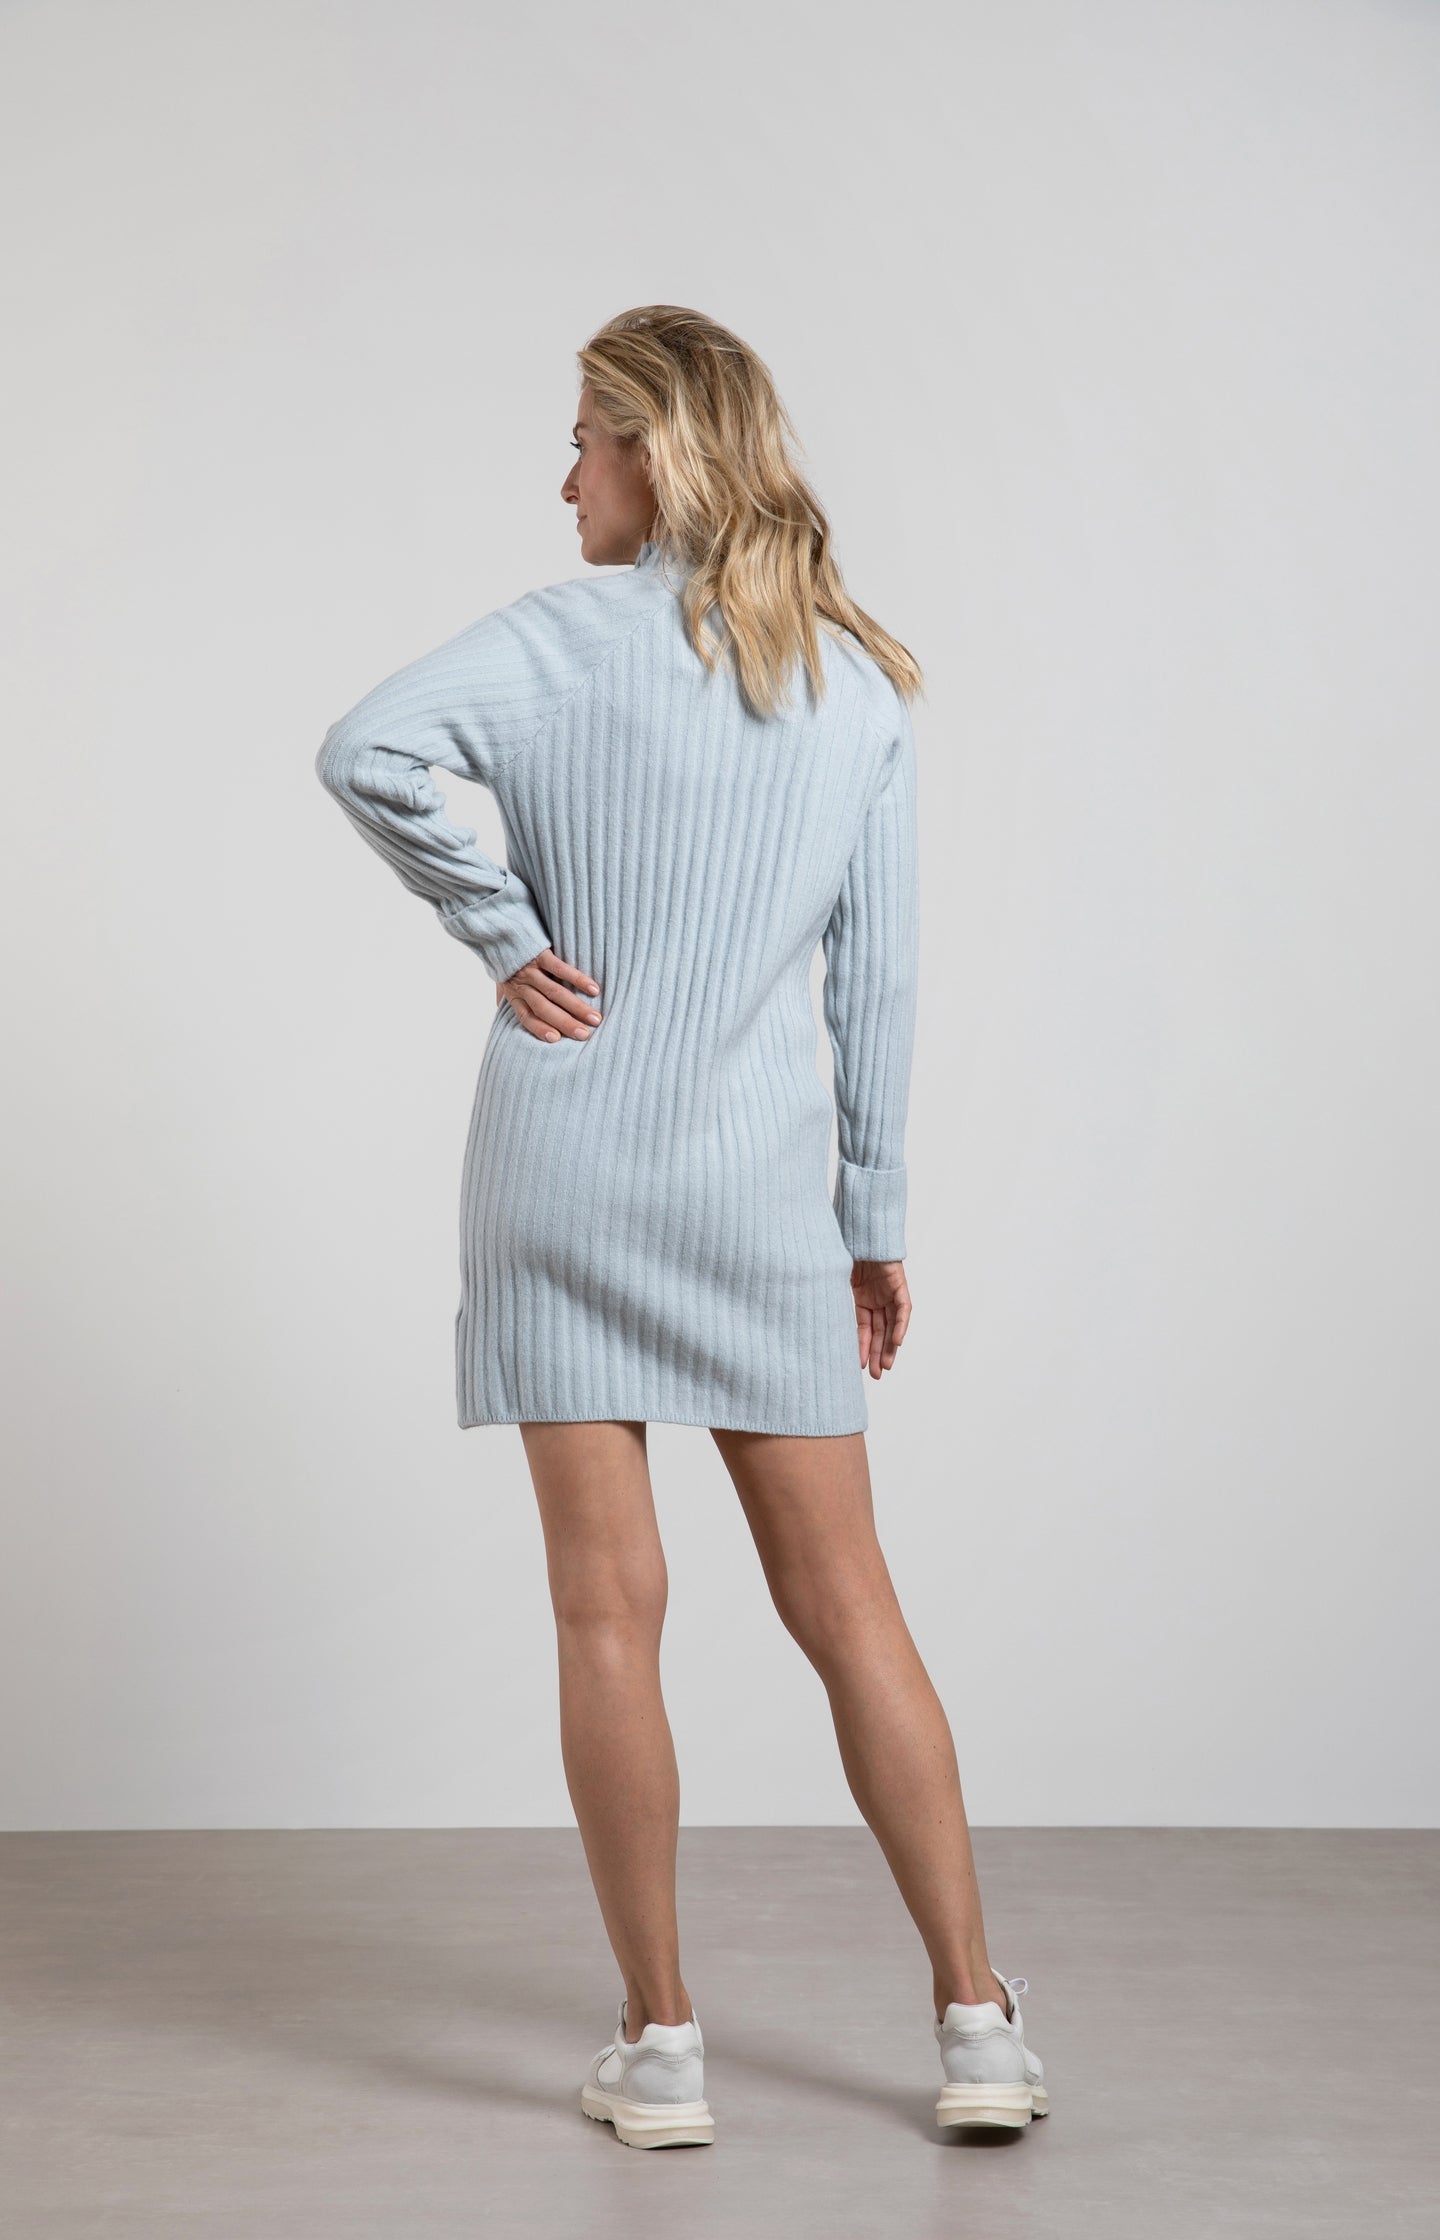 Tunic sweater with high neck, long sleeves and zipper